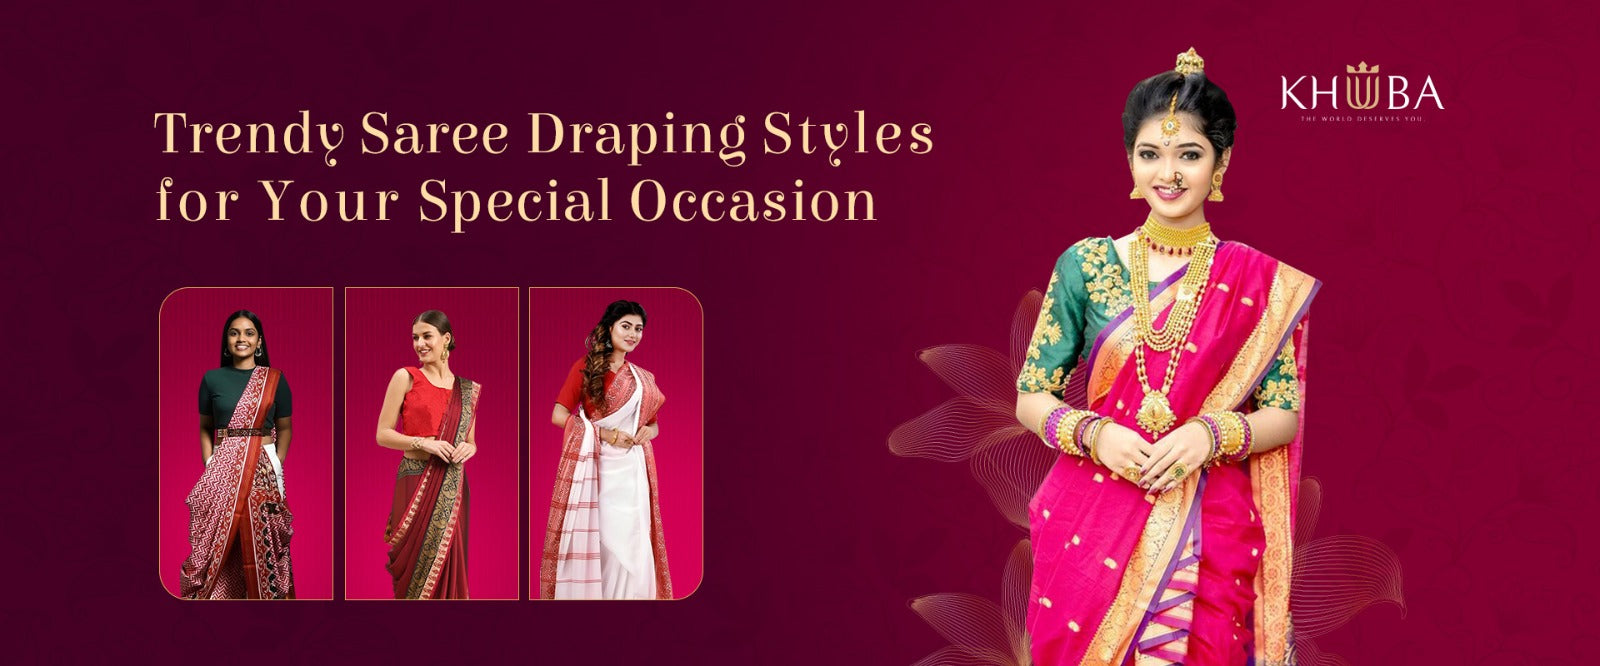 Saree Draping styles rich in tradition and culture and IP rights